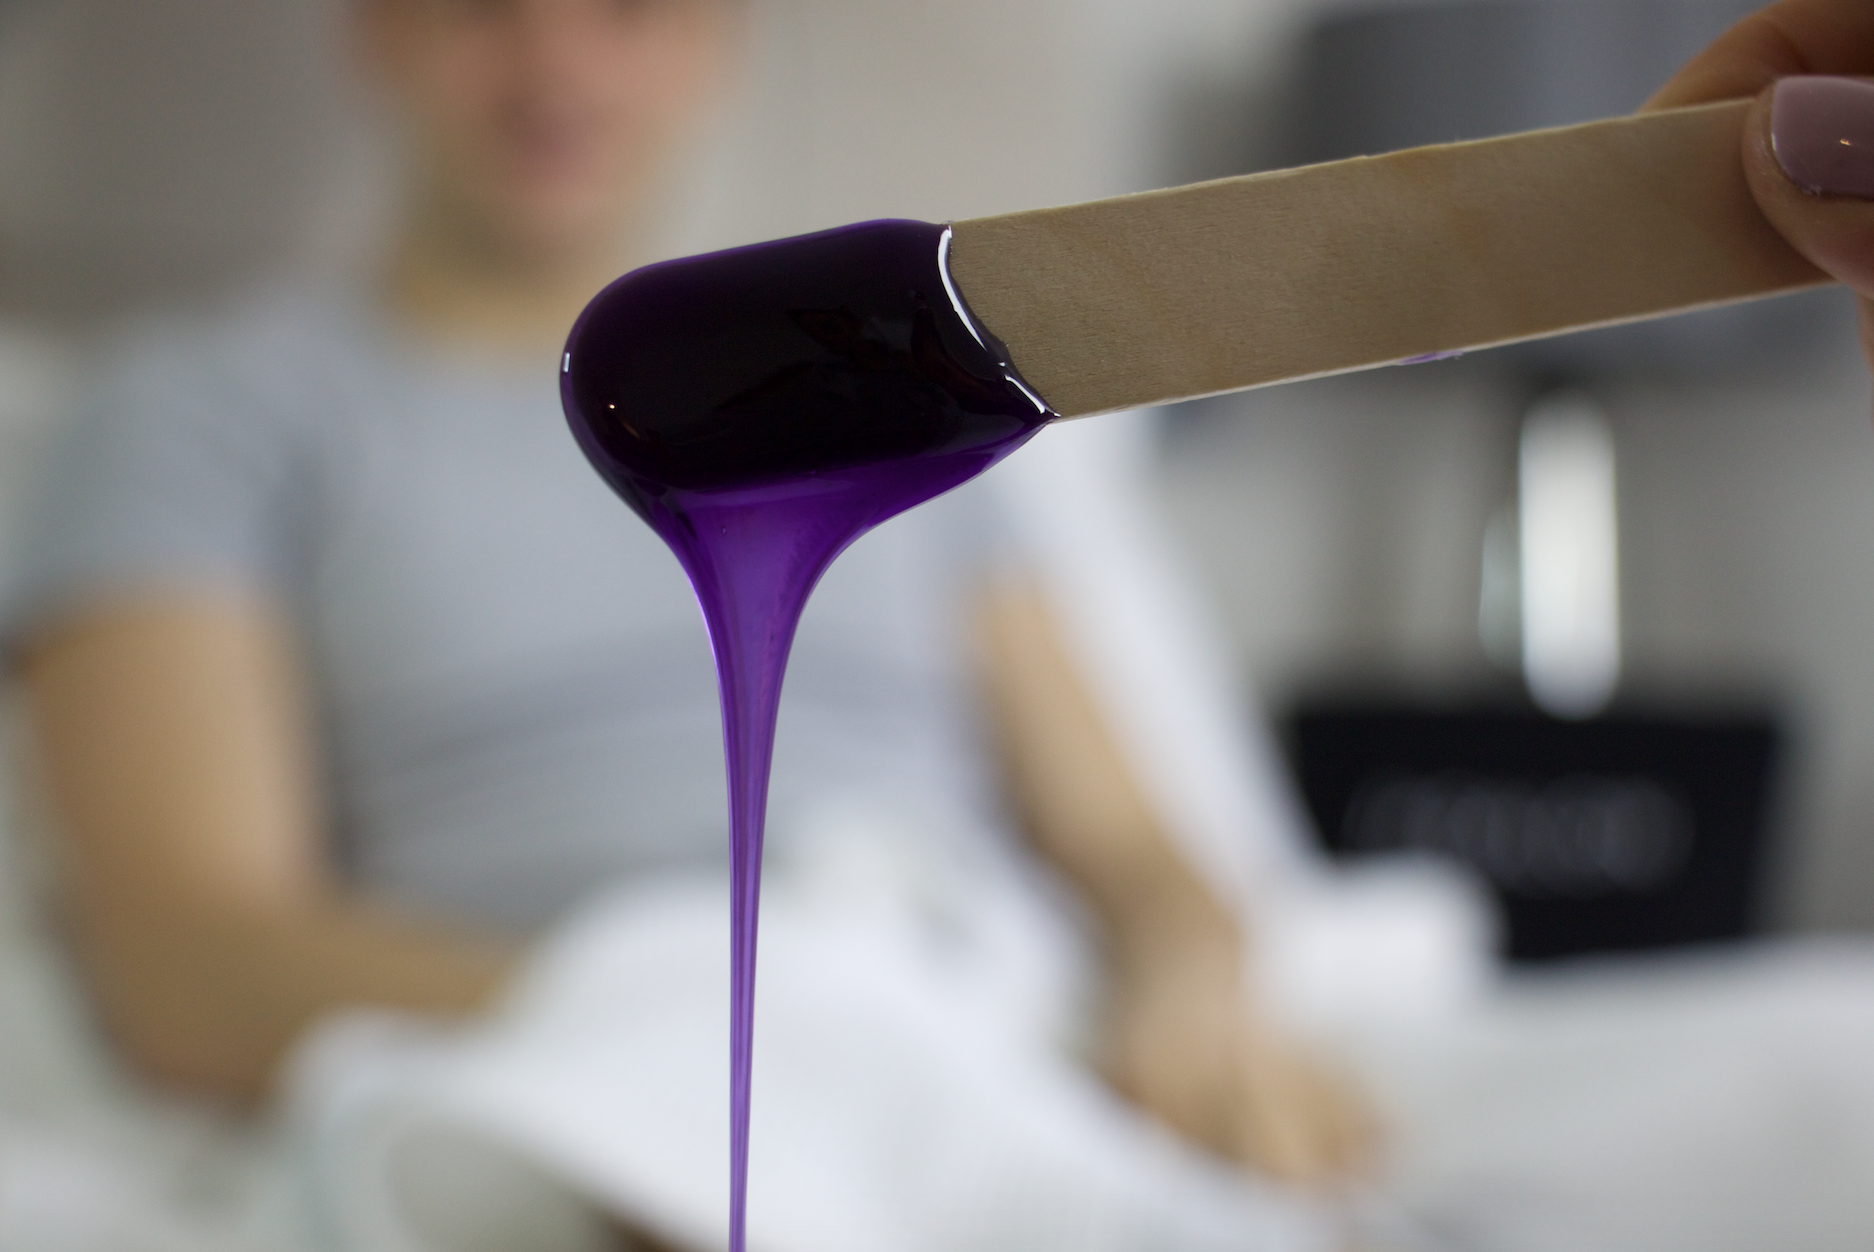 Waxing FAQS: The good, the bad and the embarrassing